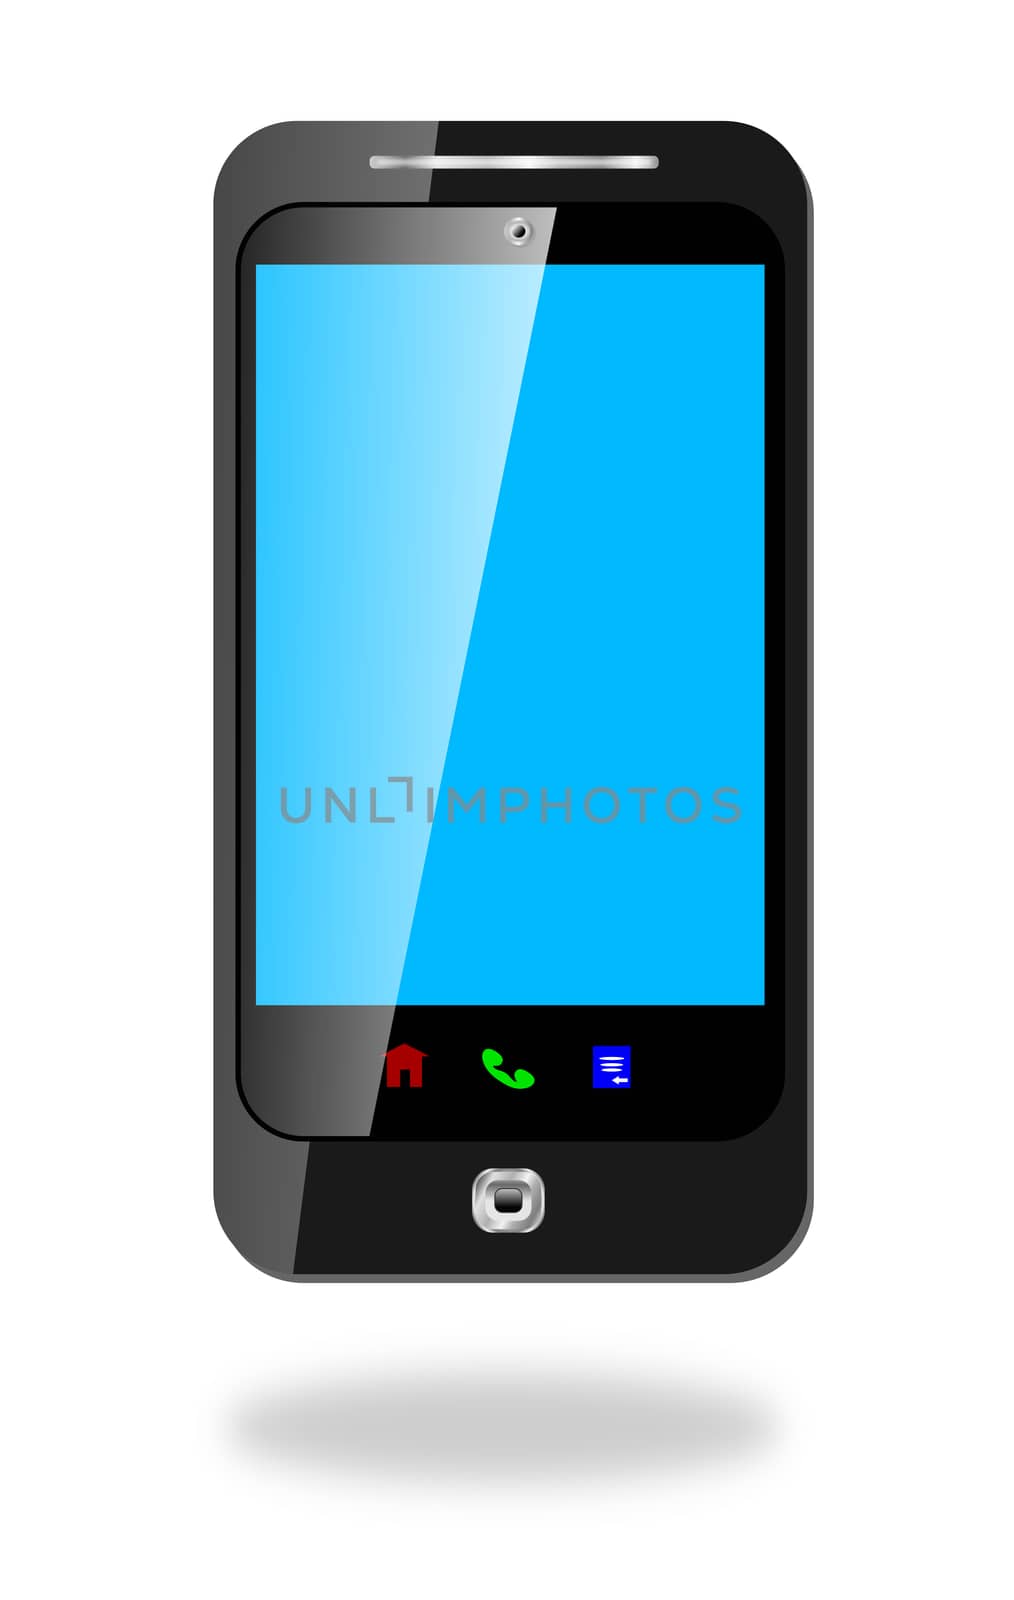 Touch Screen Smart Cell Phone by RichieThakur